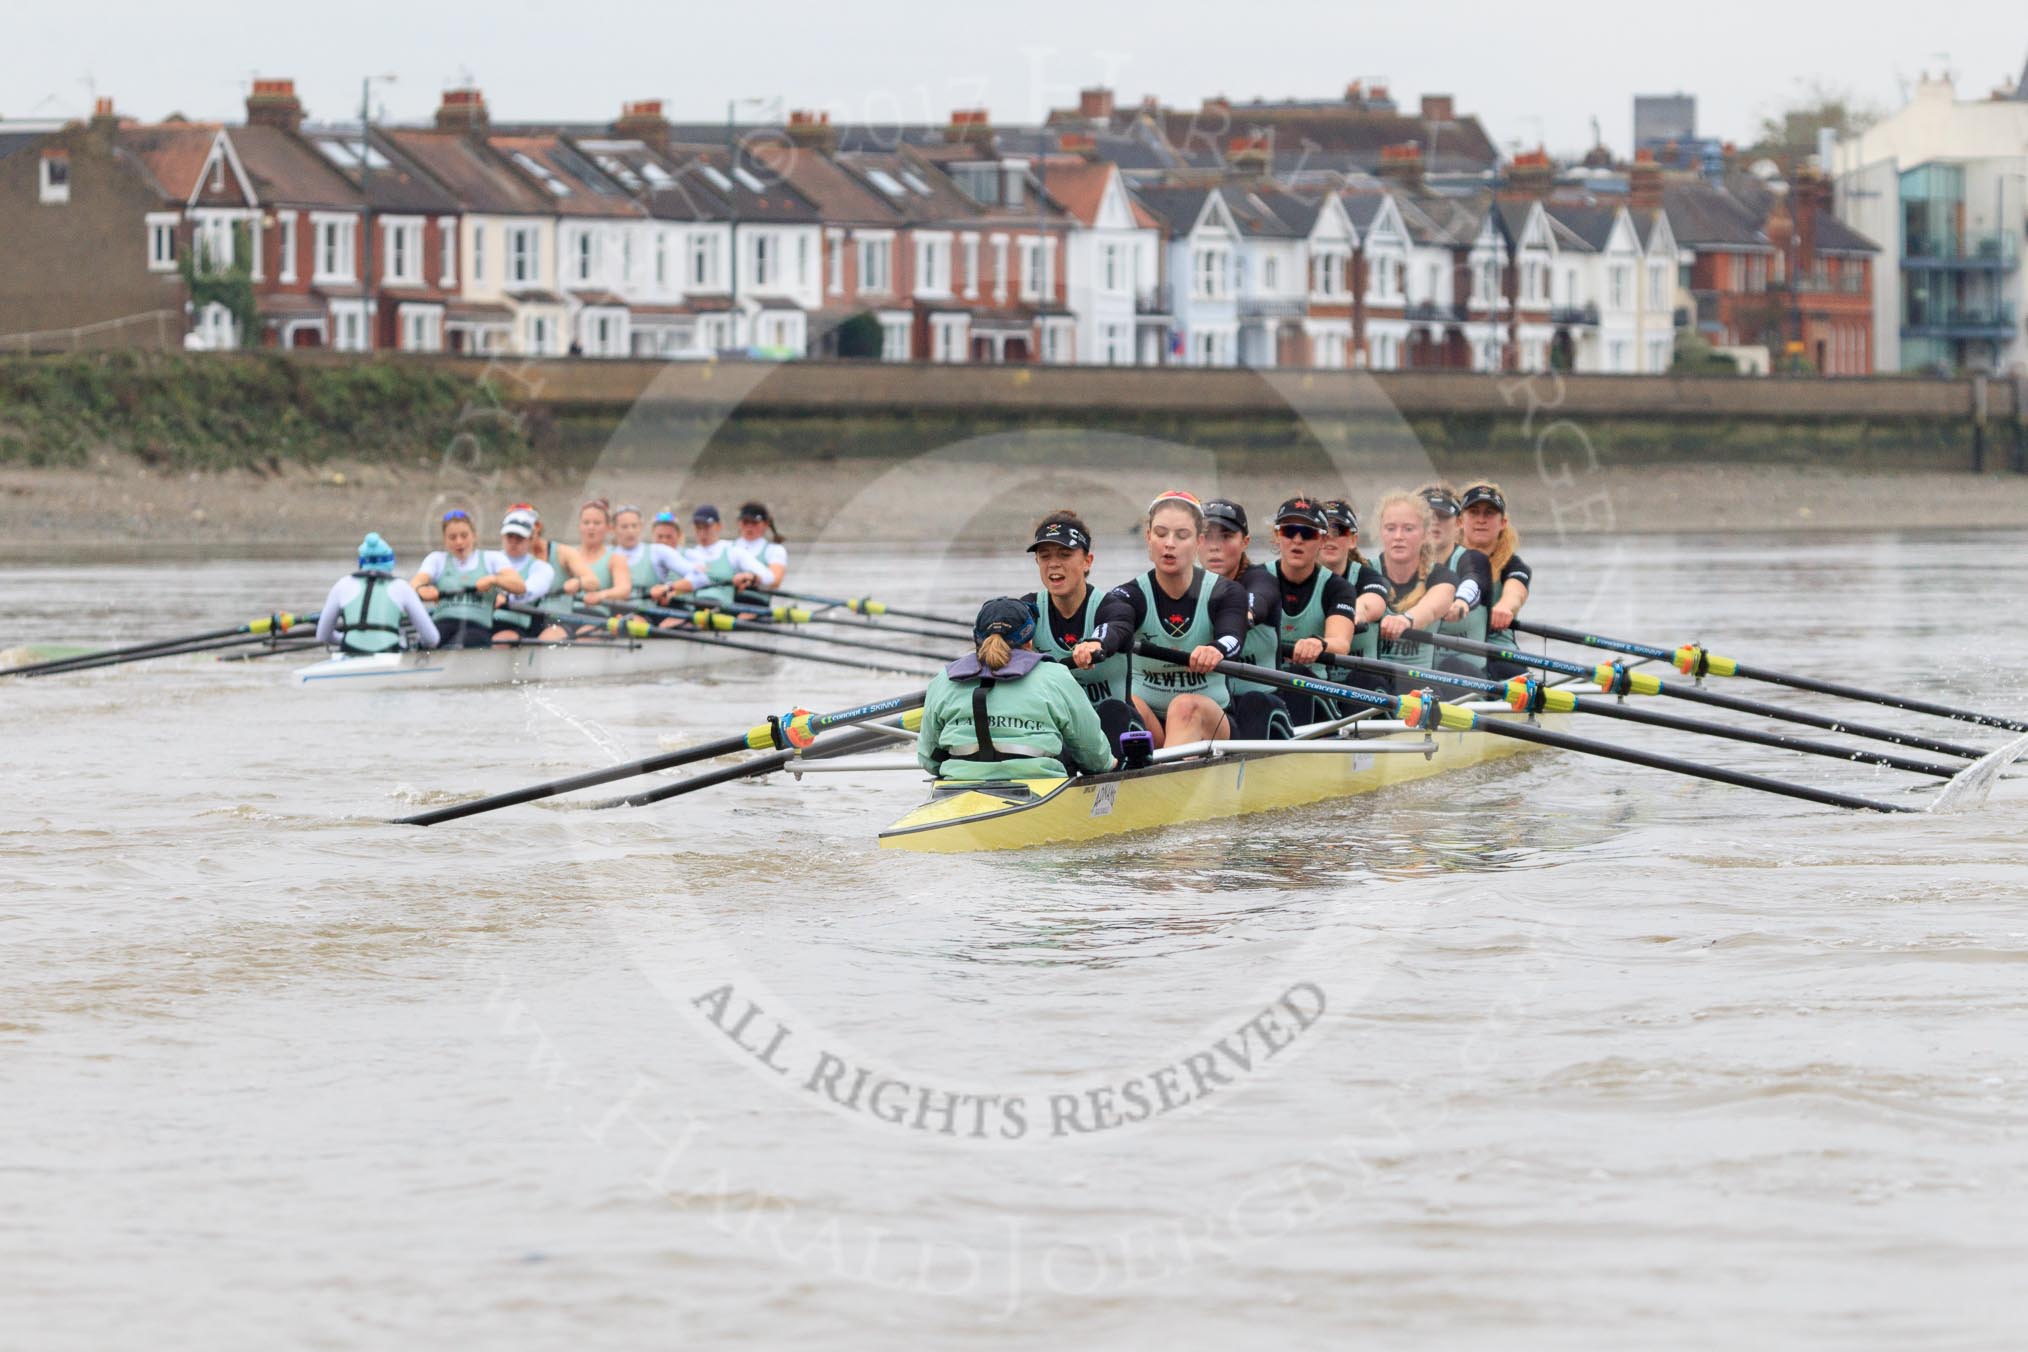 The Boat Race season 2018 - Women's Boat Race Trial Eights (CUWBC, Cambridge): Expecto Patronum leading on the approach to the bandstand.
River Thames between Putney Bridge and Mortlake,
London SW15,

United Kingdom,
on 05 December 2017 at 12:57, image #147